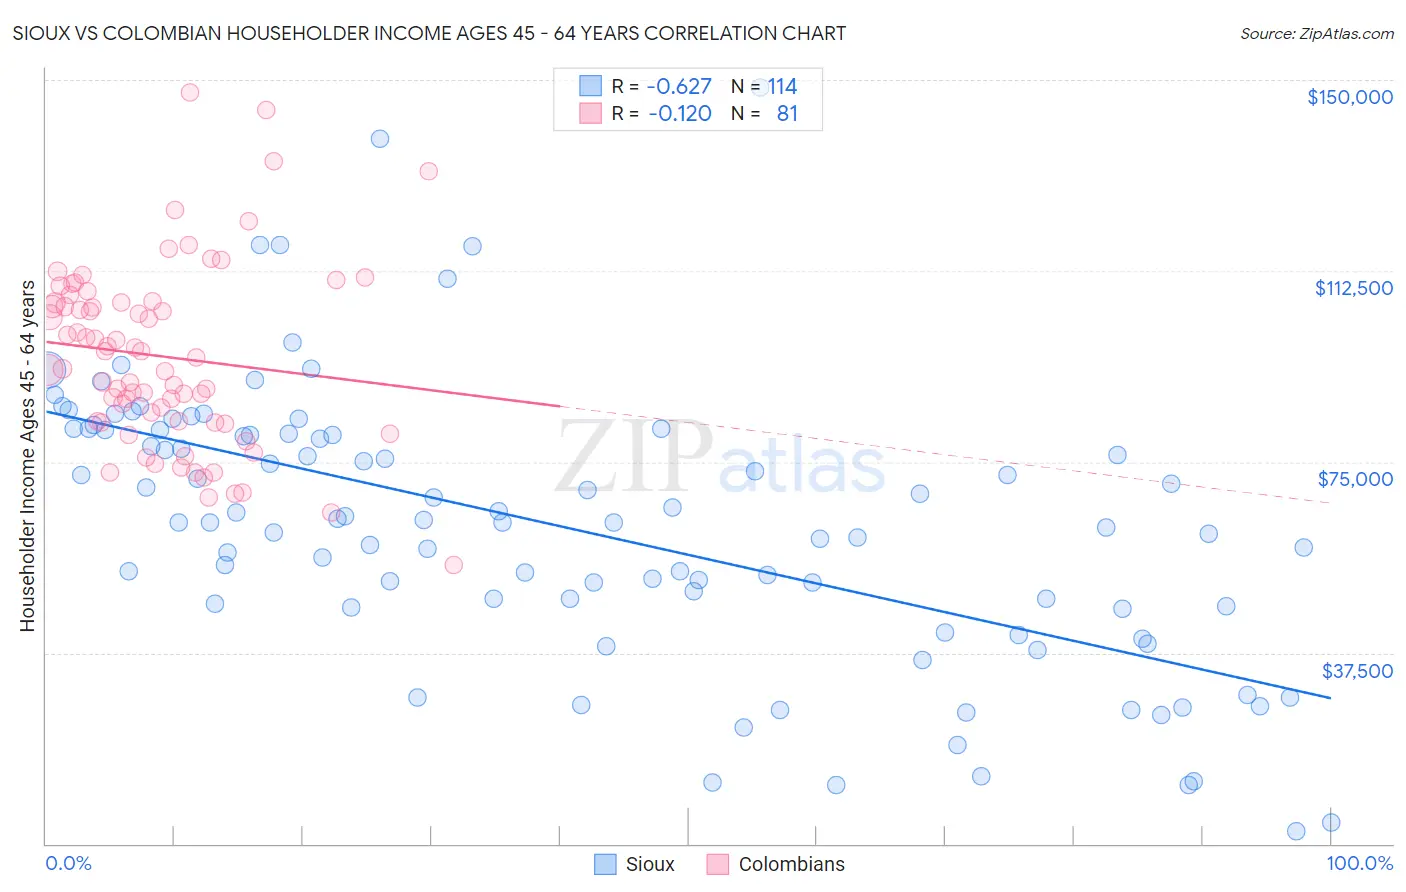 Sioux vs Colombian Householder Income Ages 45 - 64 years